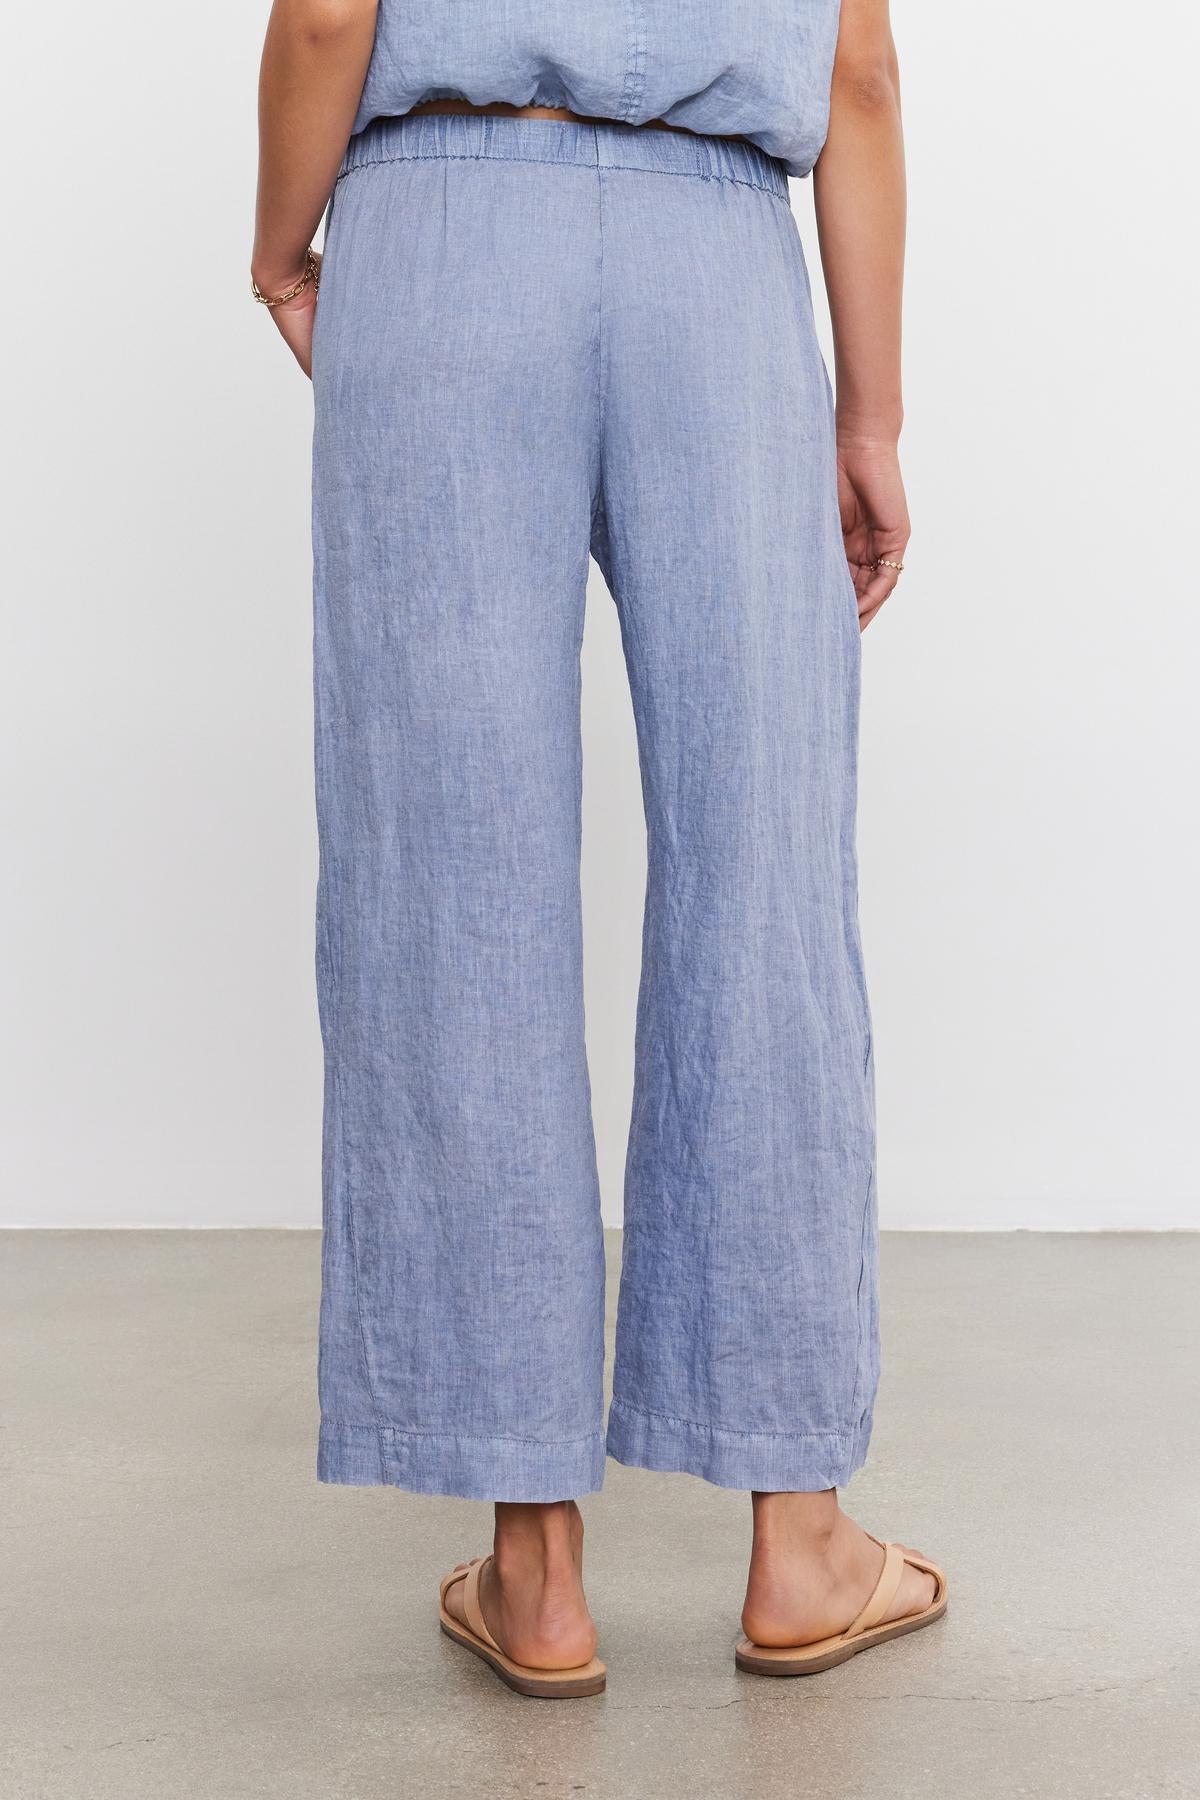 Woman standing in Velvet by Graham & Spencer's LOLA LINEN PANT ankle crop trousers and matching top, viewed from the back, with hands partially tucked in pockets.-36910133084353